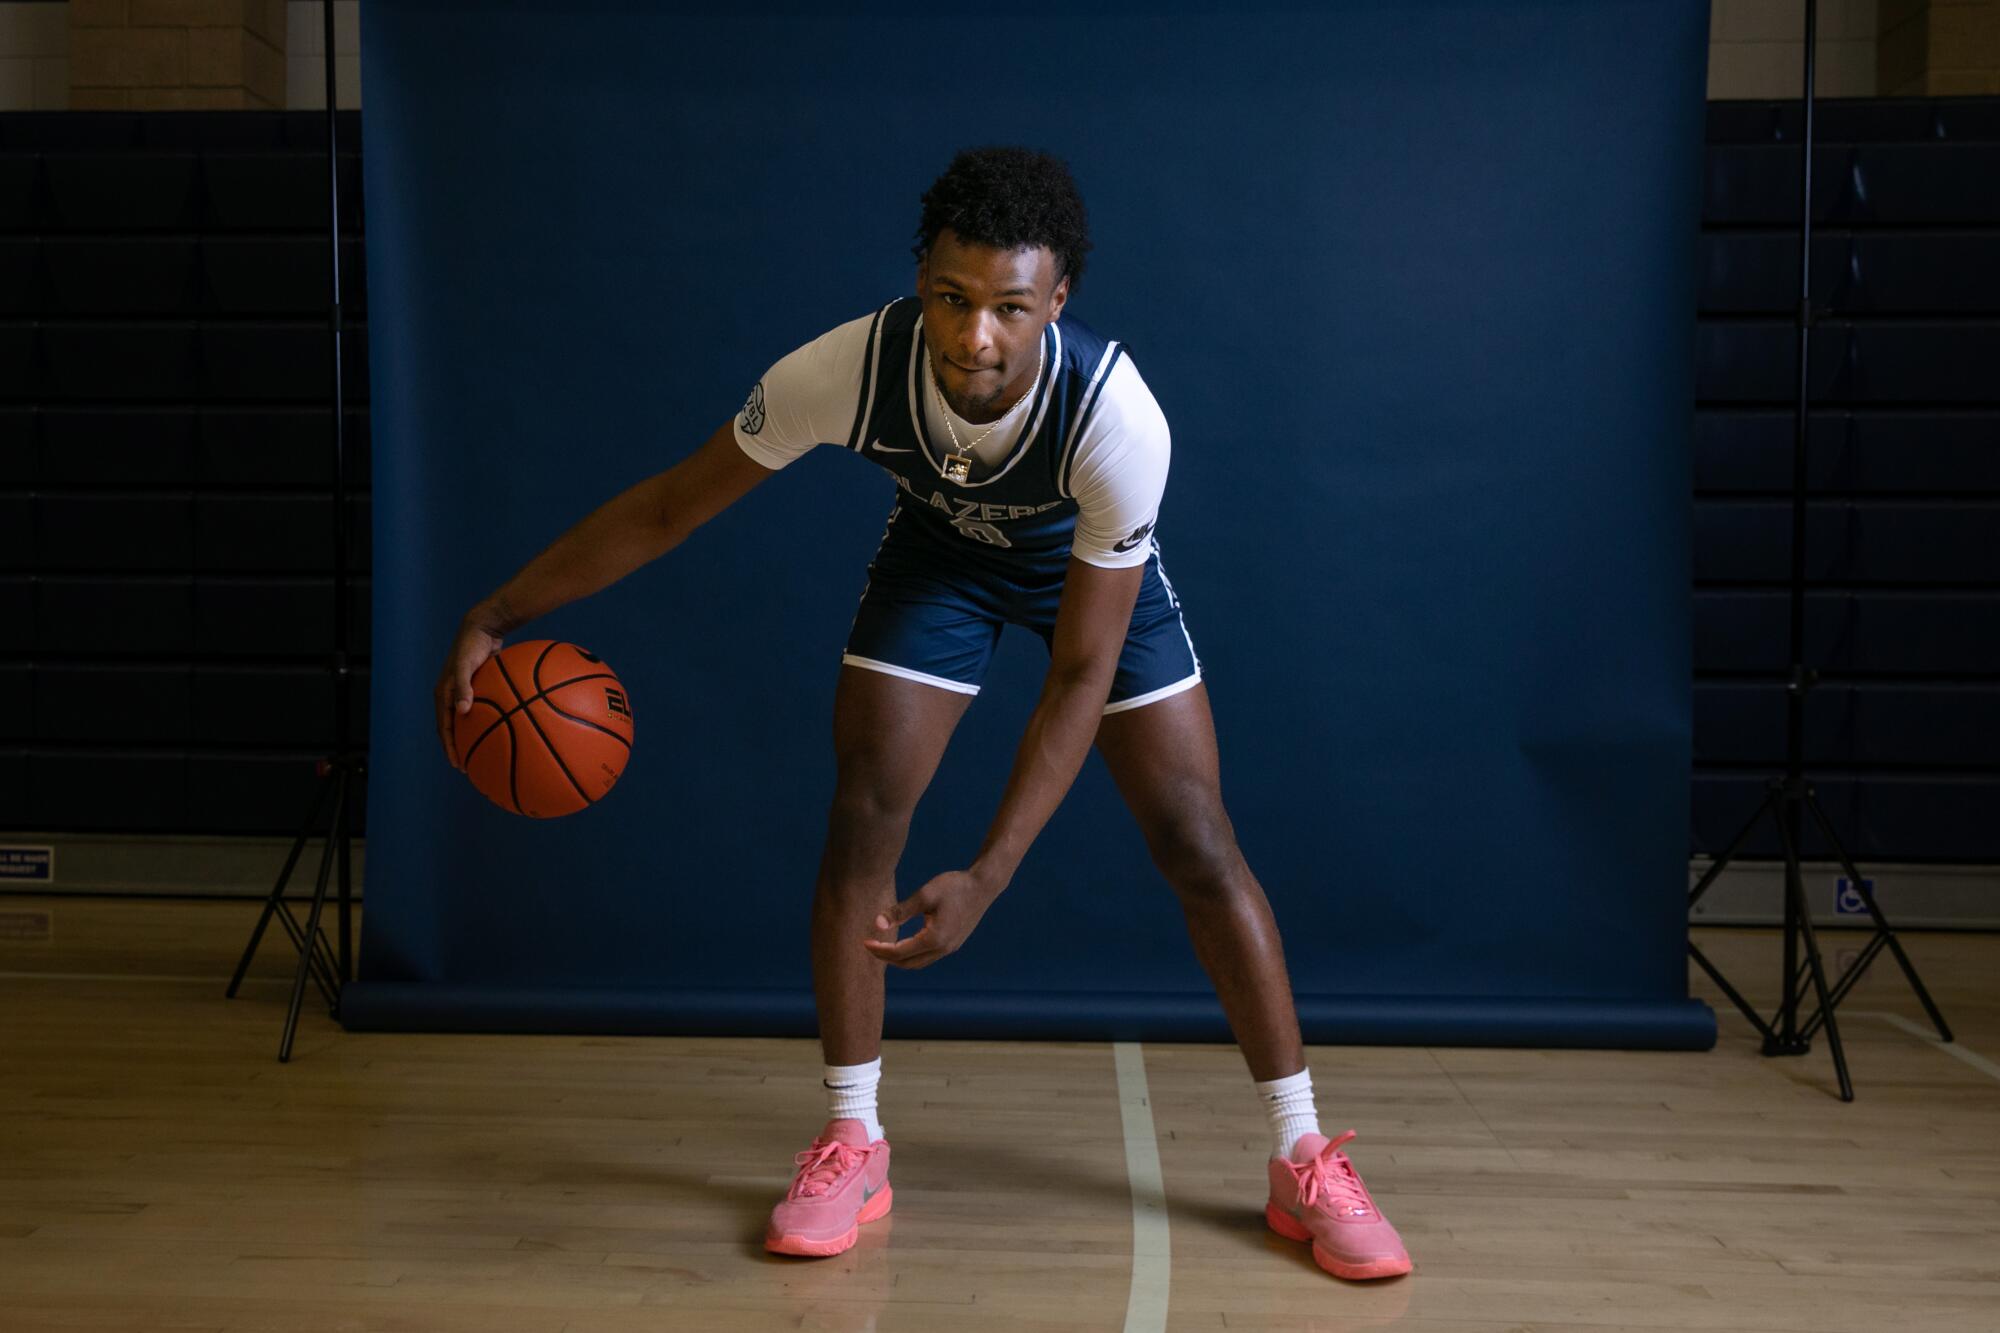 Bronny James dribbles a basketball during a photo shoot at Sierra Canyon High's media day on Oct. 12, 2022.